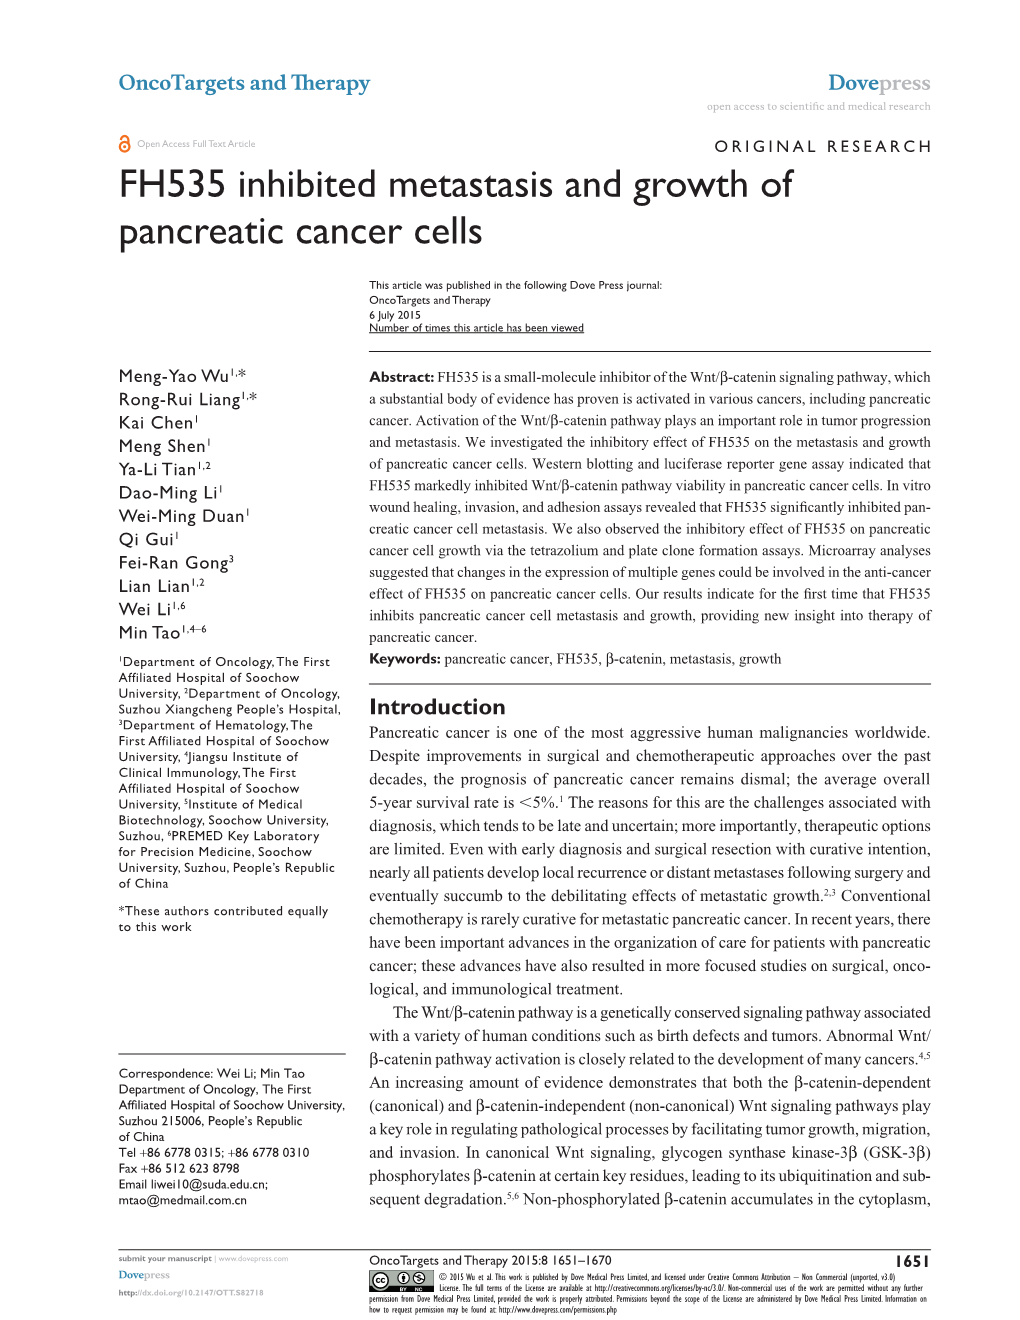 FH535 Inhibited Metastasis and Growth of Pancreatic Cancer Cells